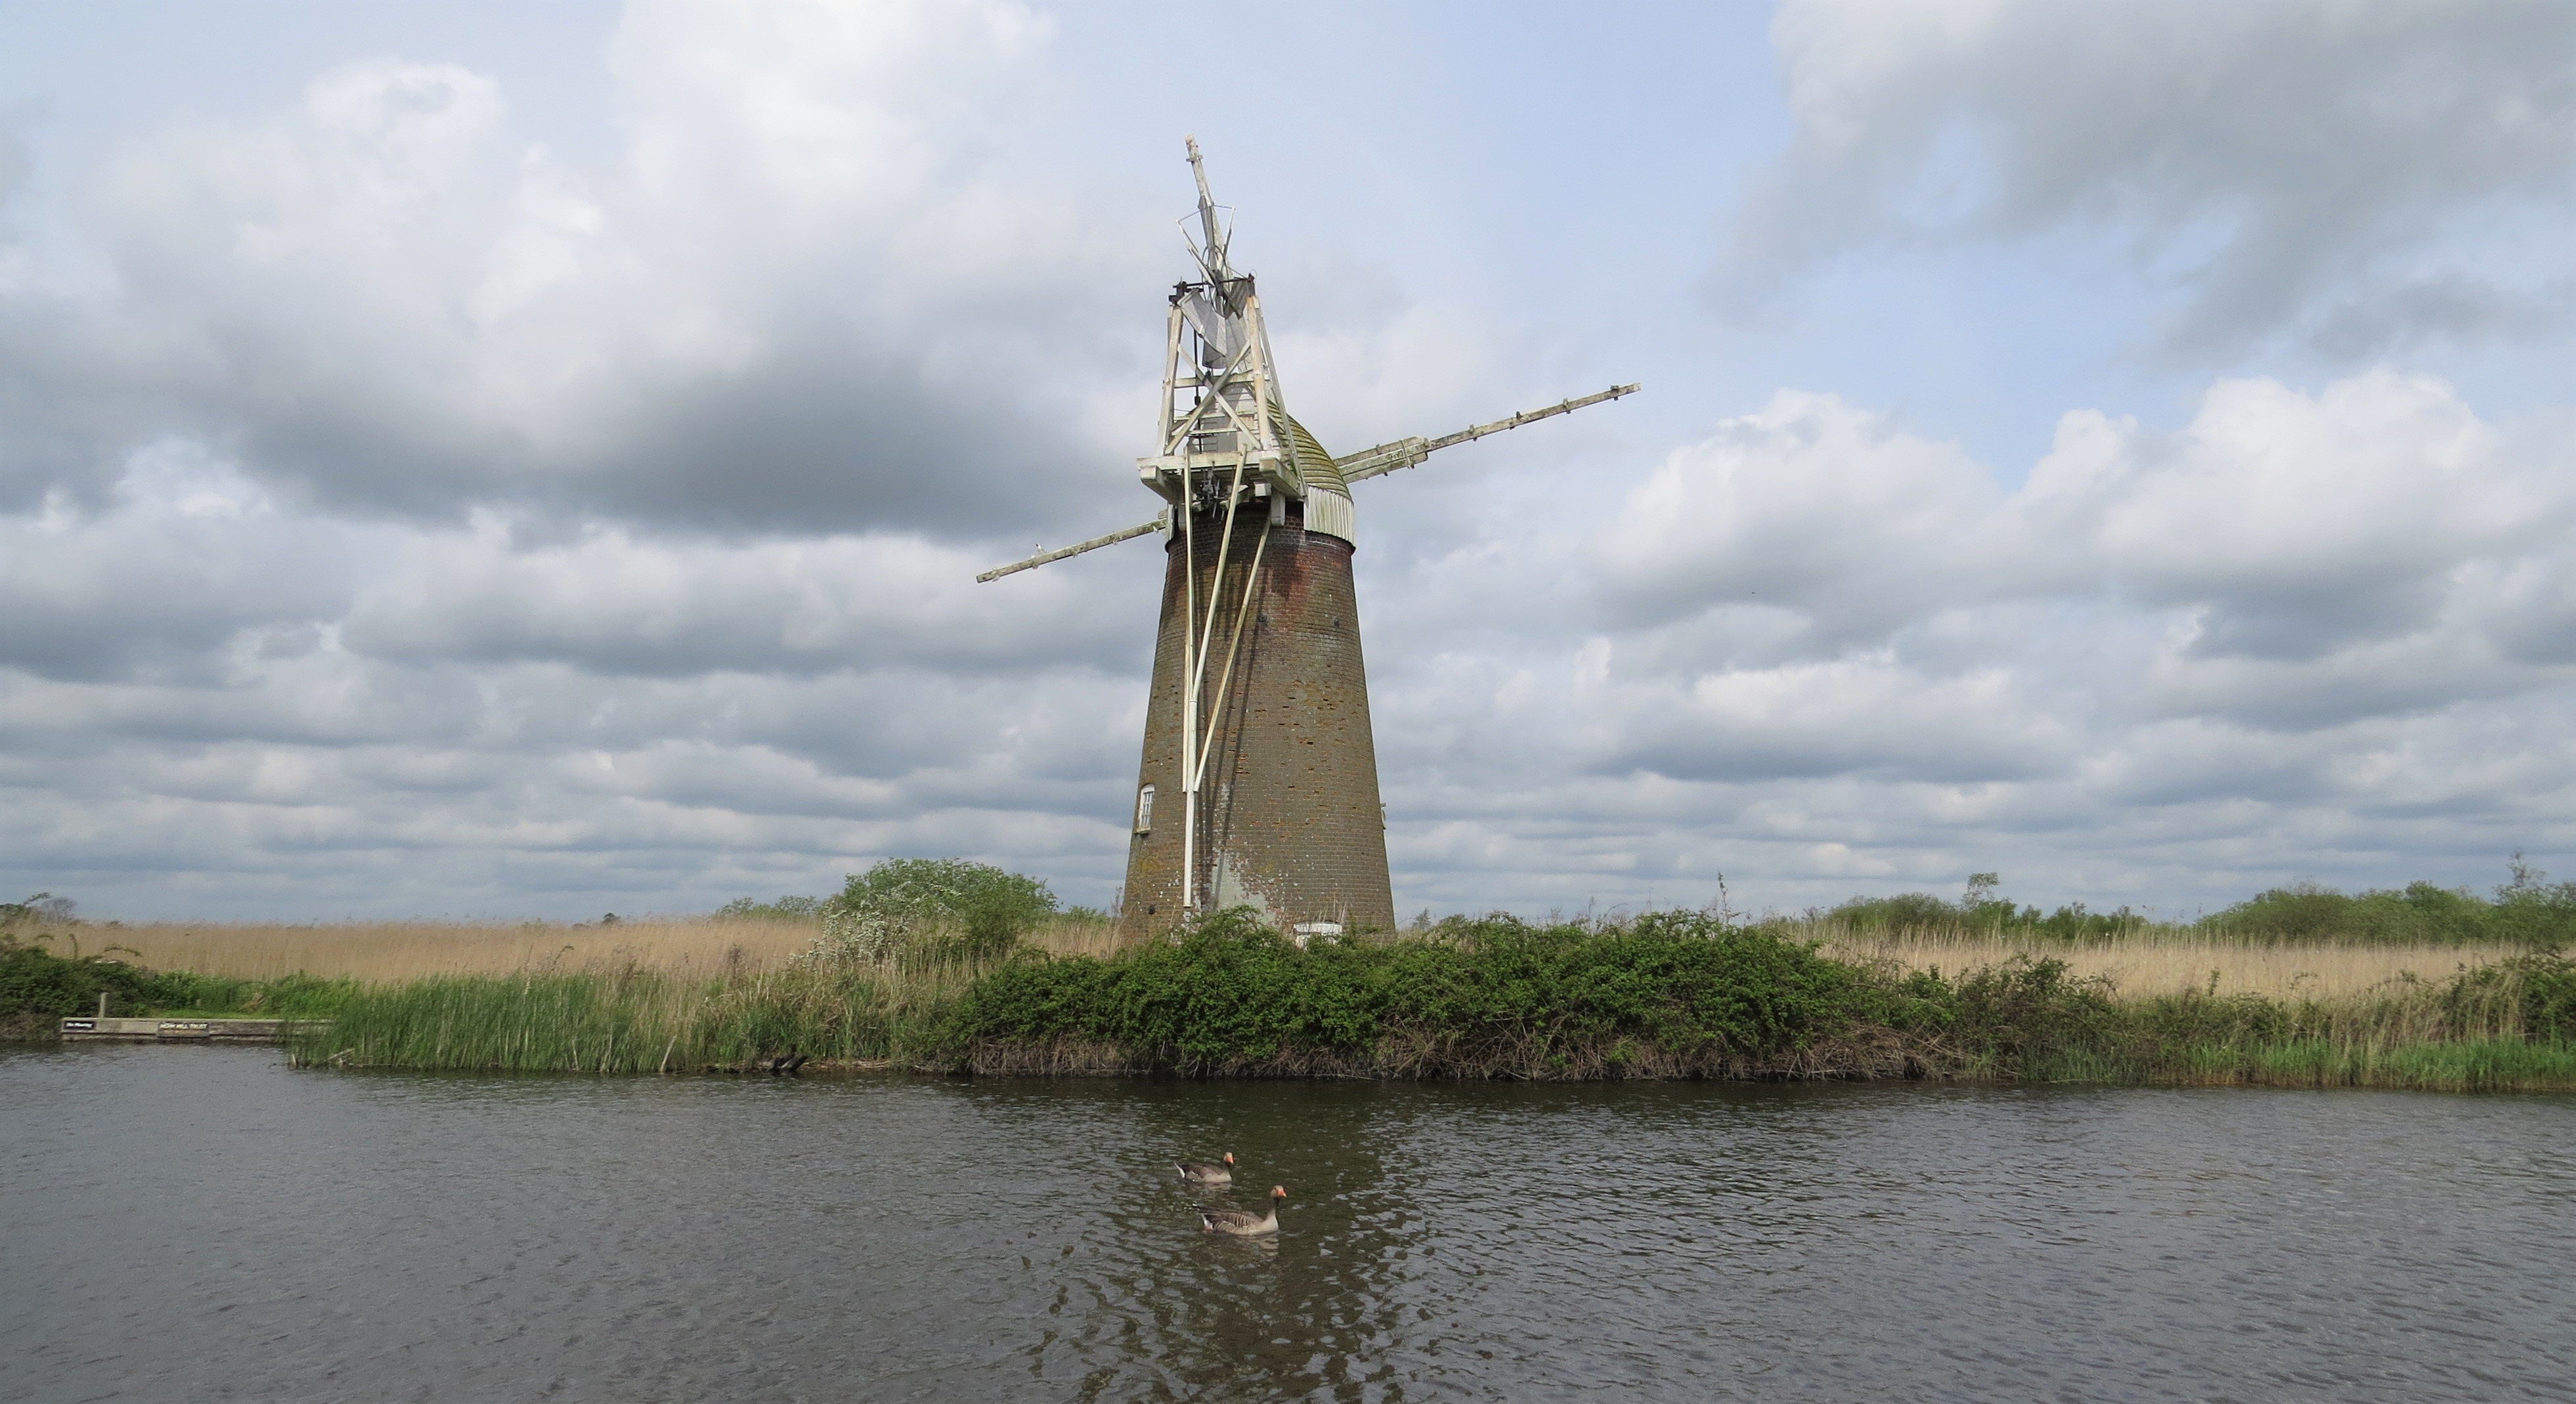 External shot of a windpump with a river in the foreground.